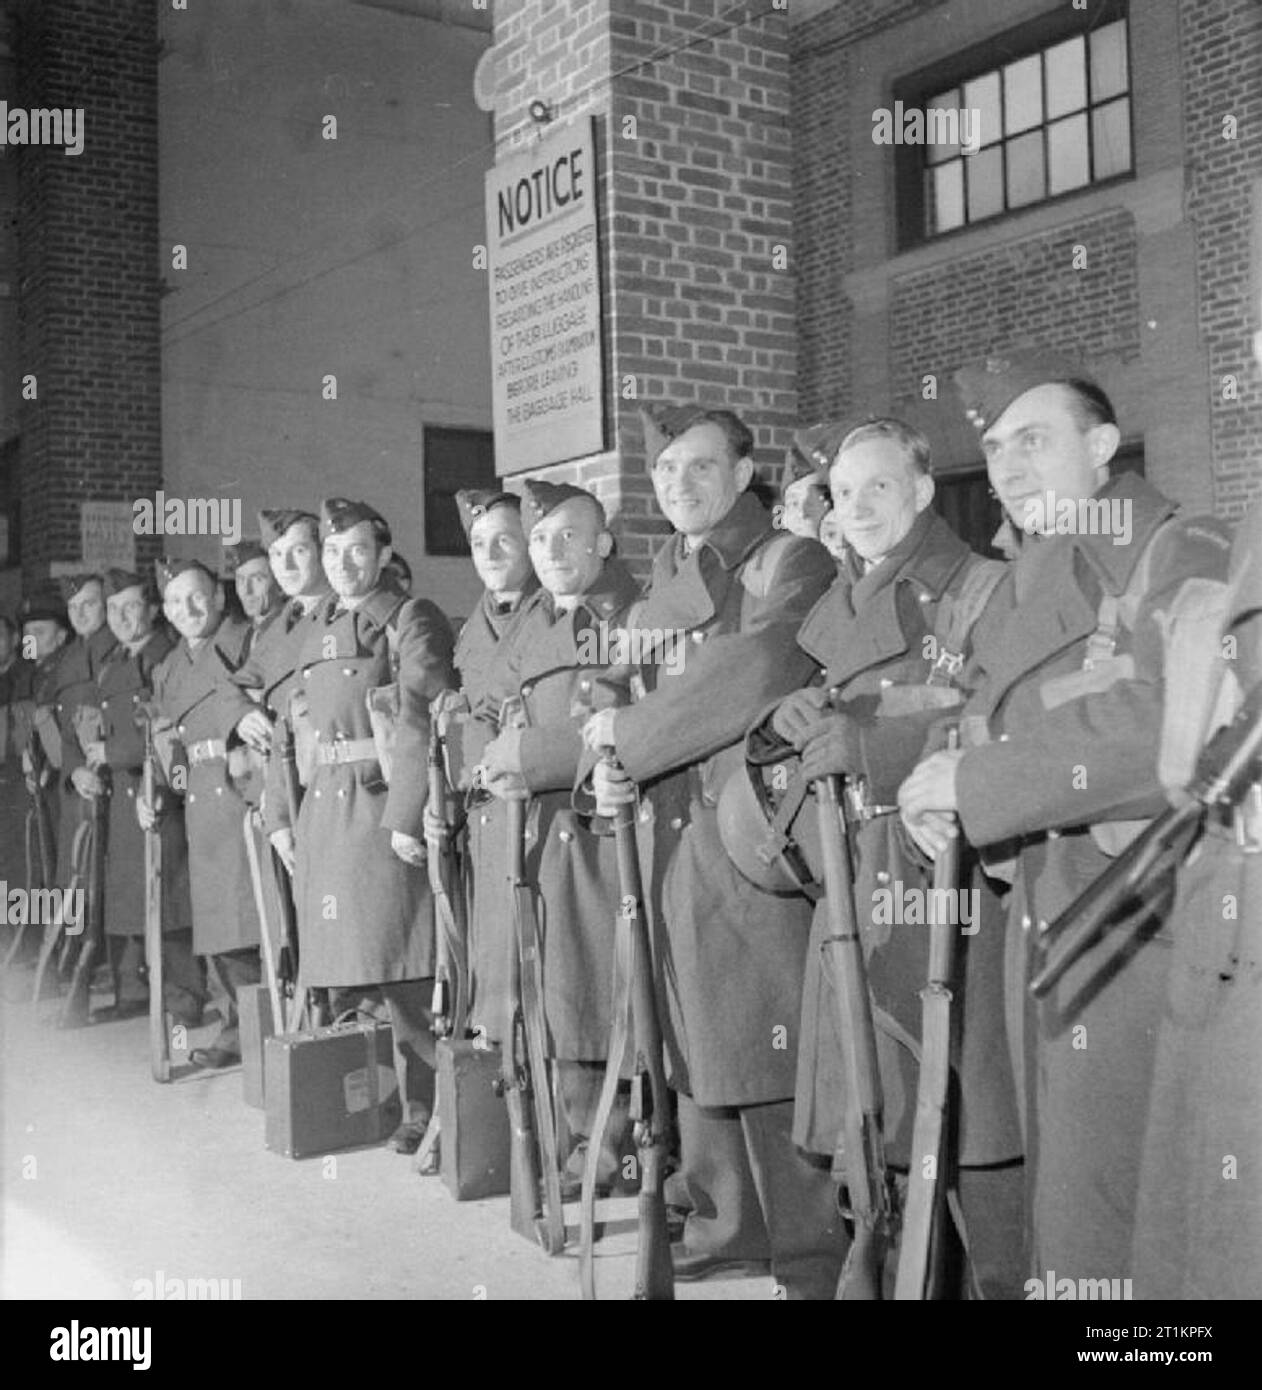 Polish Troops Repatriated From Tilbury- Transport of Troops Aboard the 'banfora', Tilbury, Essex, England, UK, 1945 Polish airmen line up with their luggage and rifles as they wait to board the SS Banfora, at Tilbury. Stock Photo